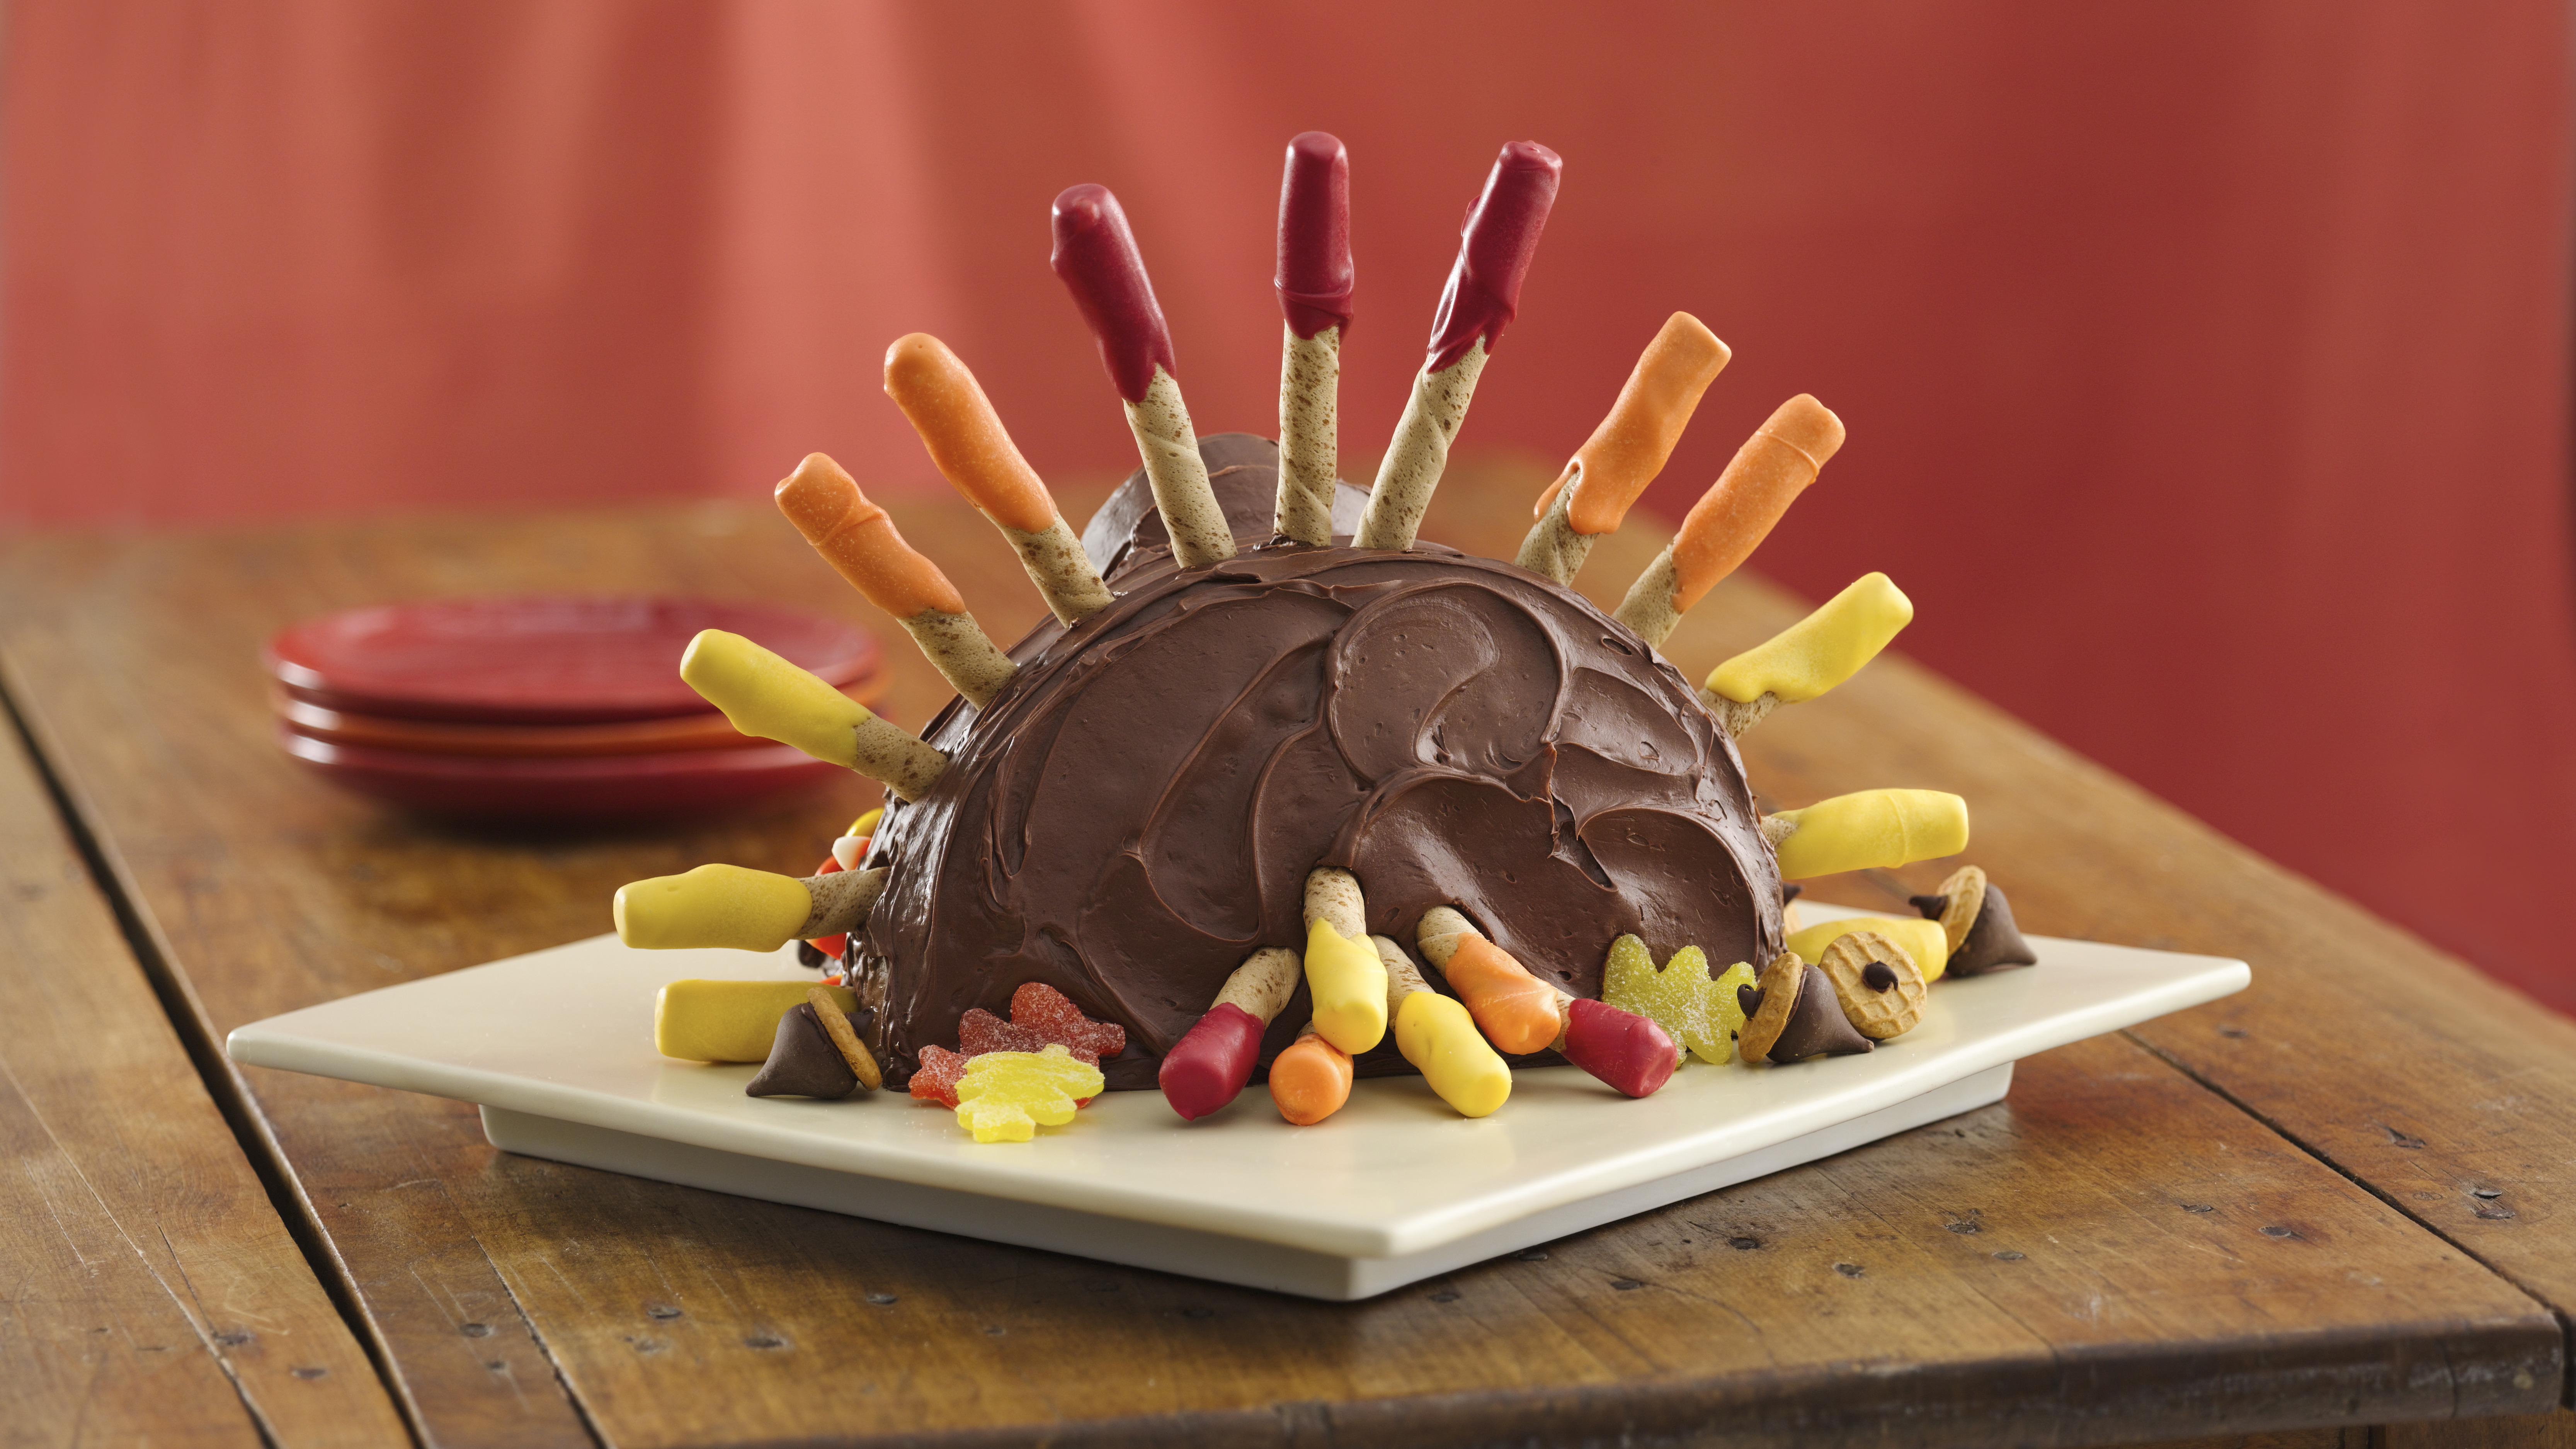 Online Turkey Bird Theme Chocolate Cake Gift Delivery in UAE - FNP